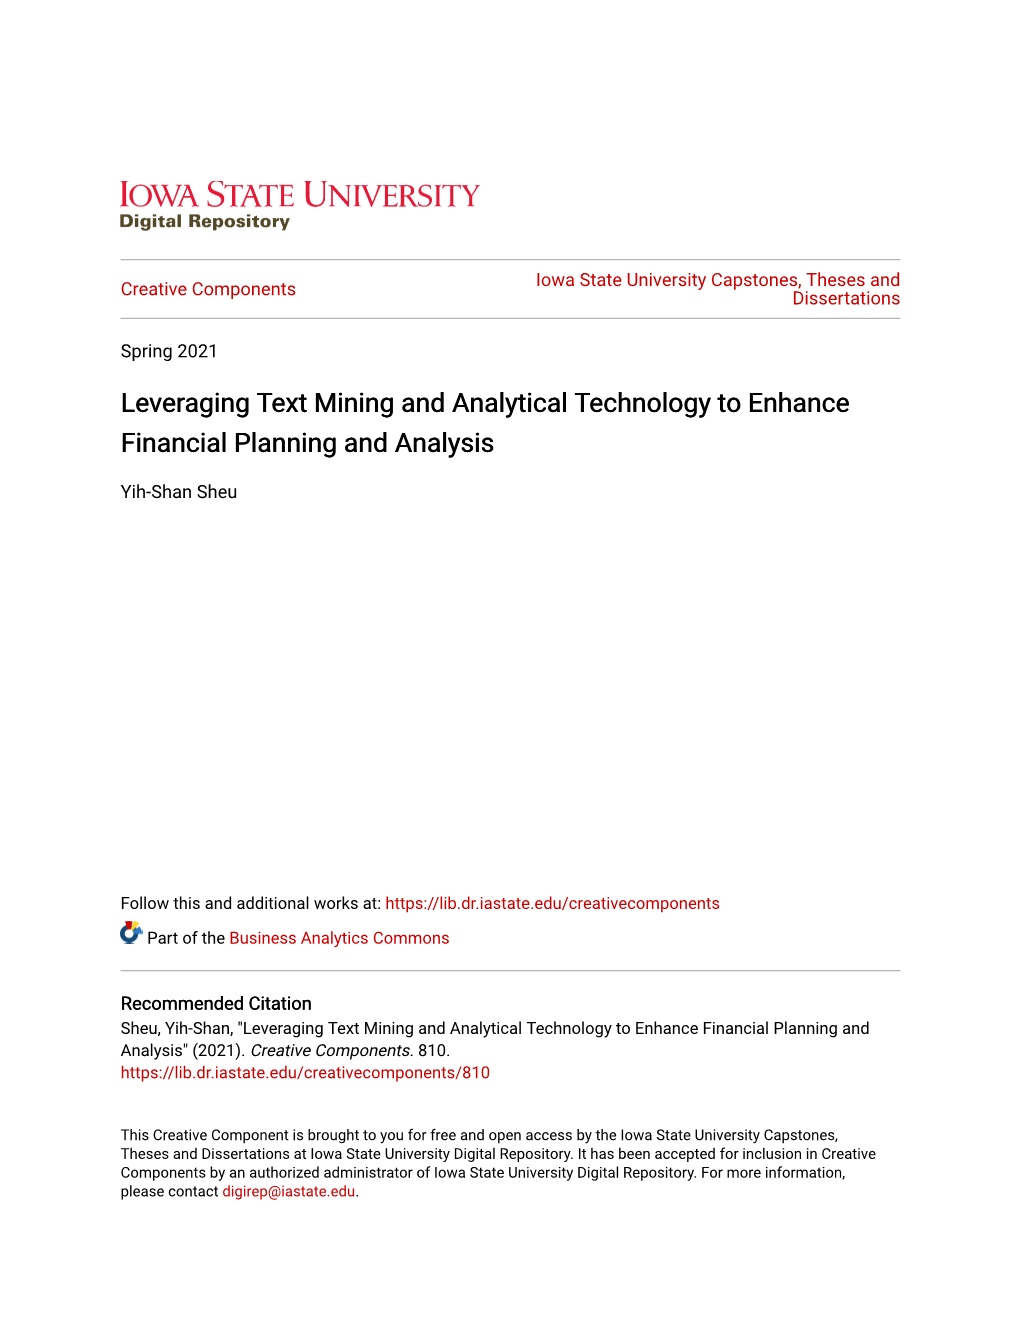 Leveraging Text Mining and Analytical Technology to Enhance Financial Planning and Analysis